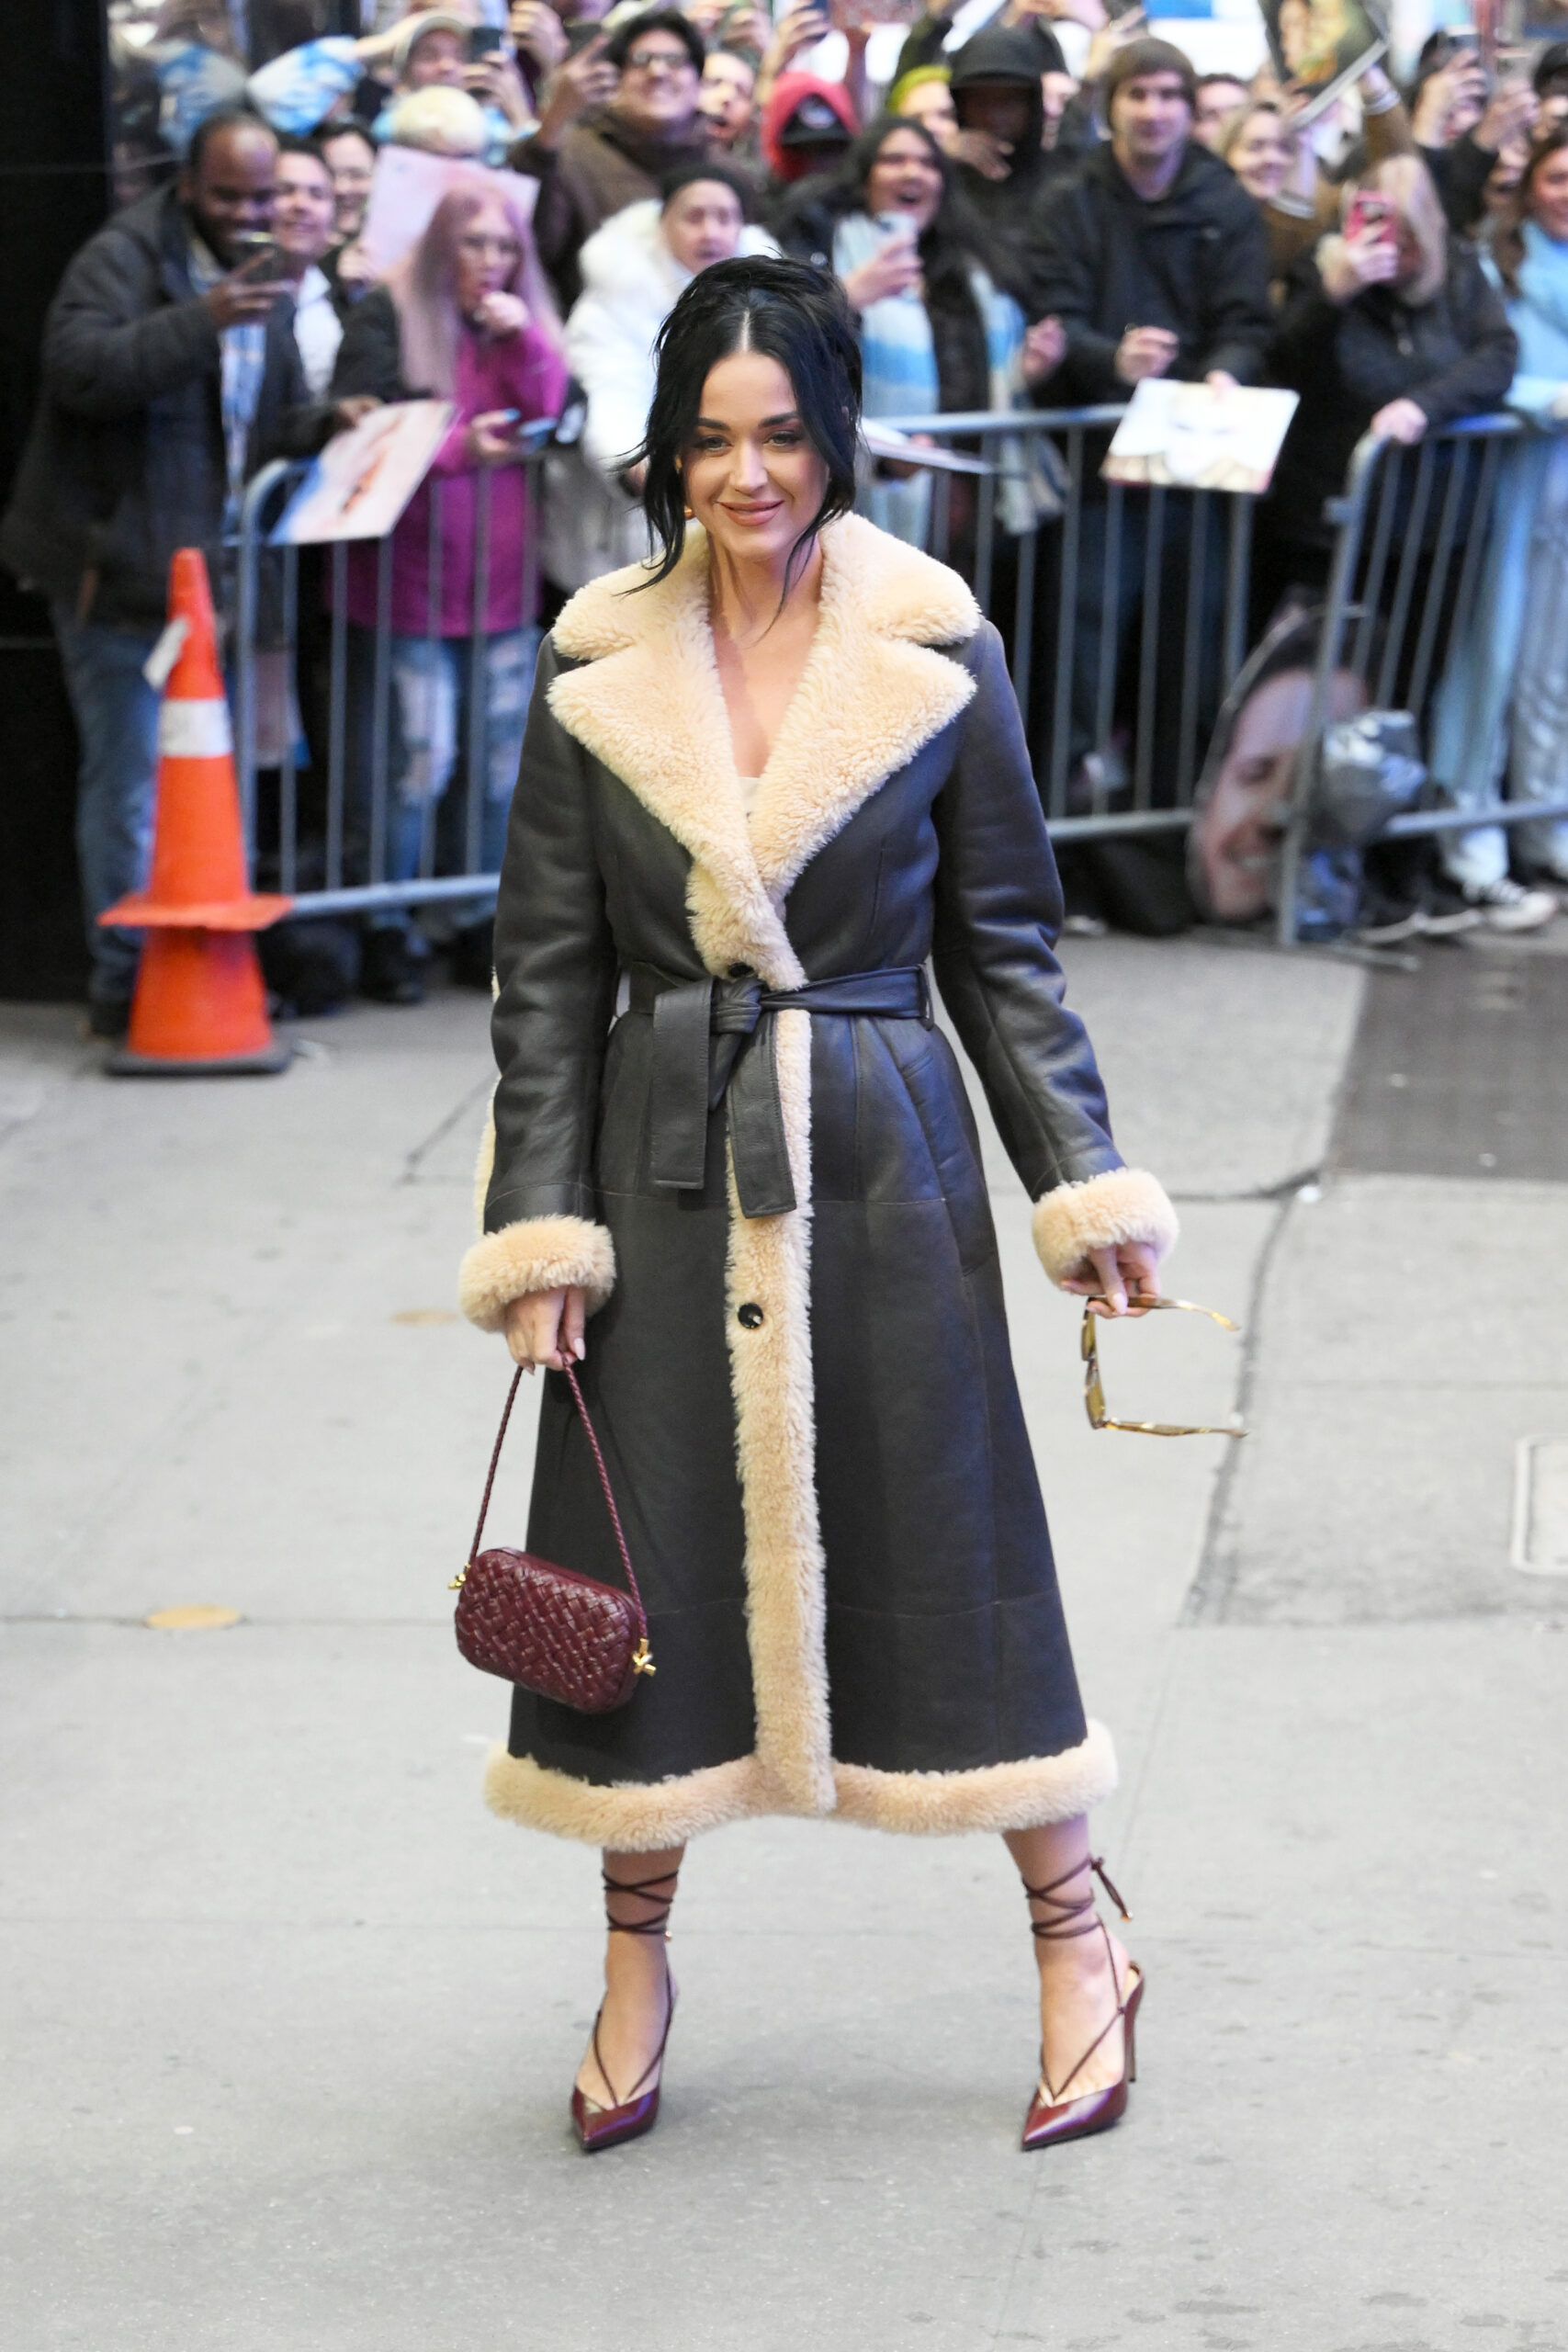 Katy Perry wearing a fur coat